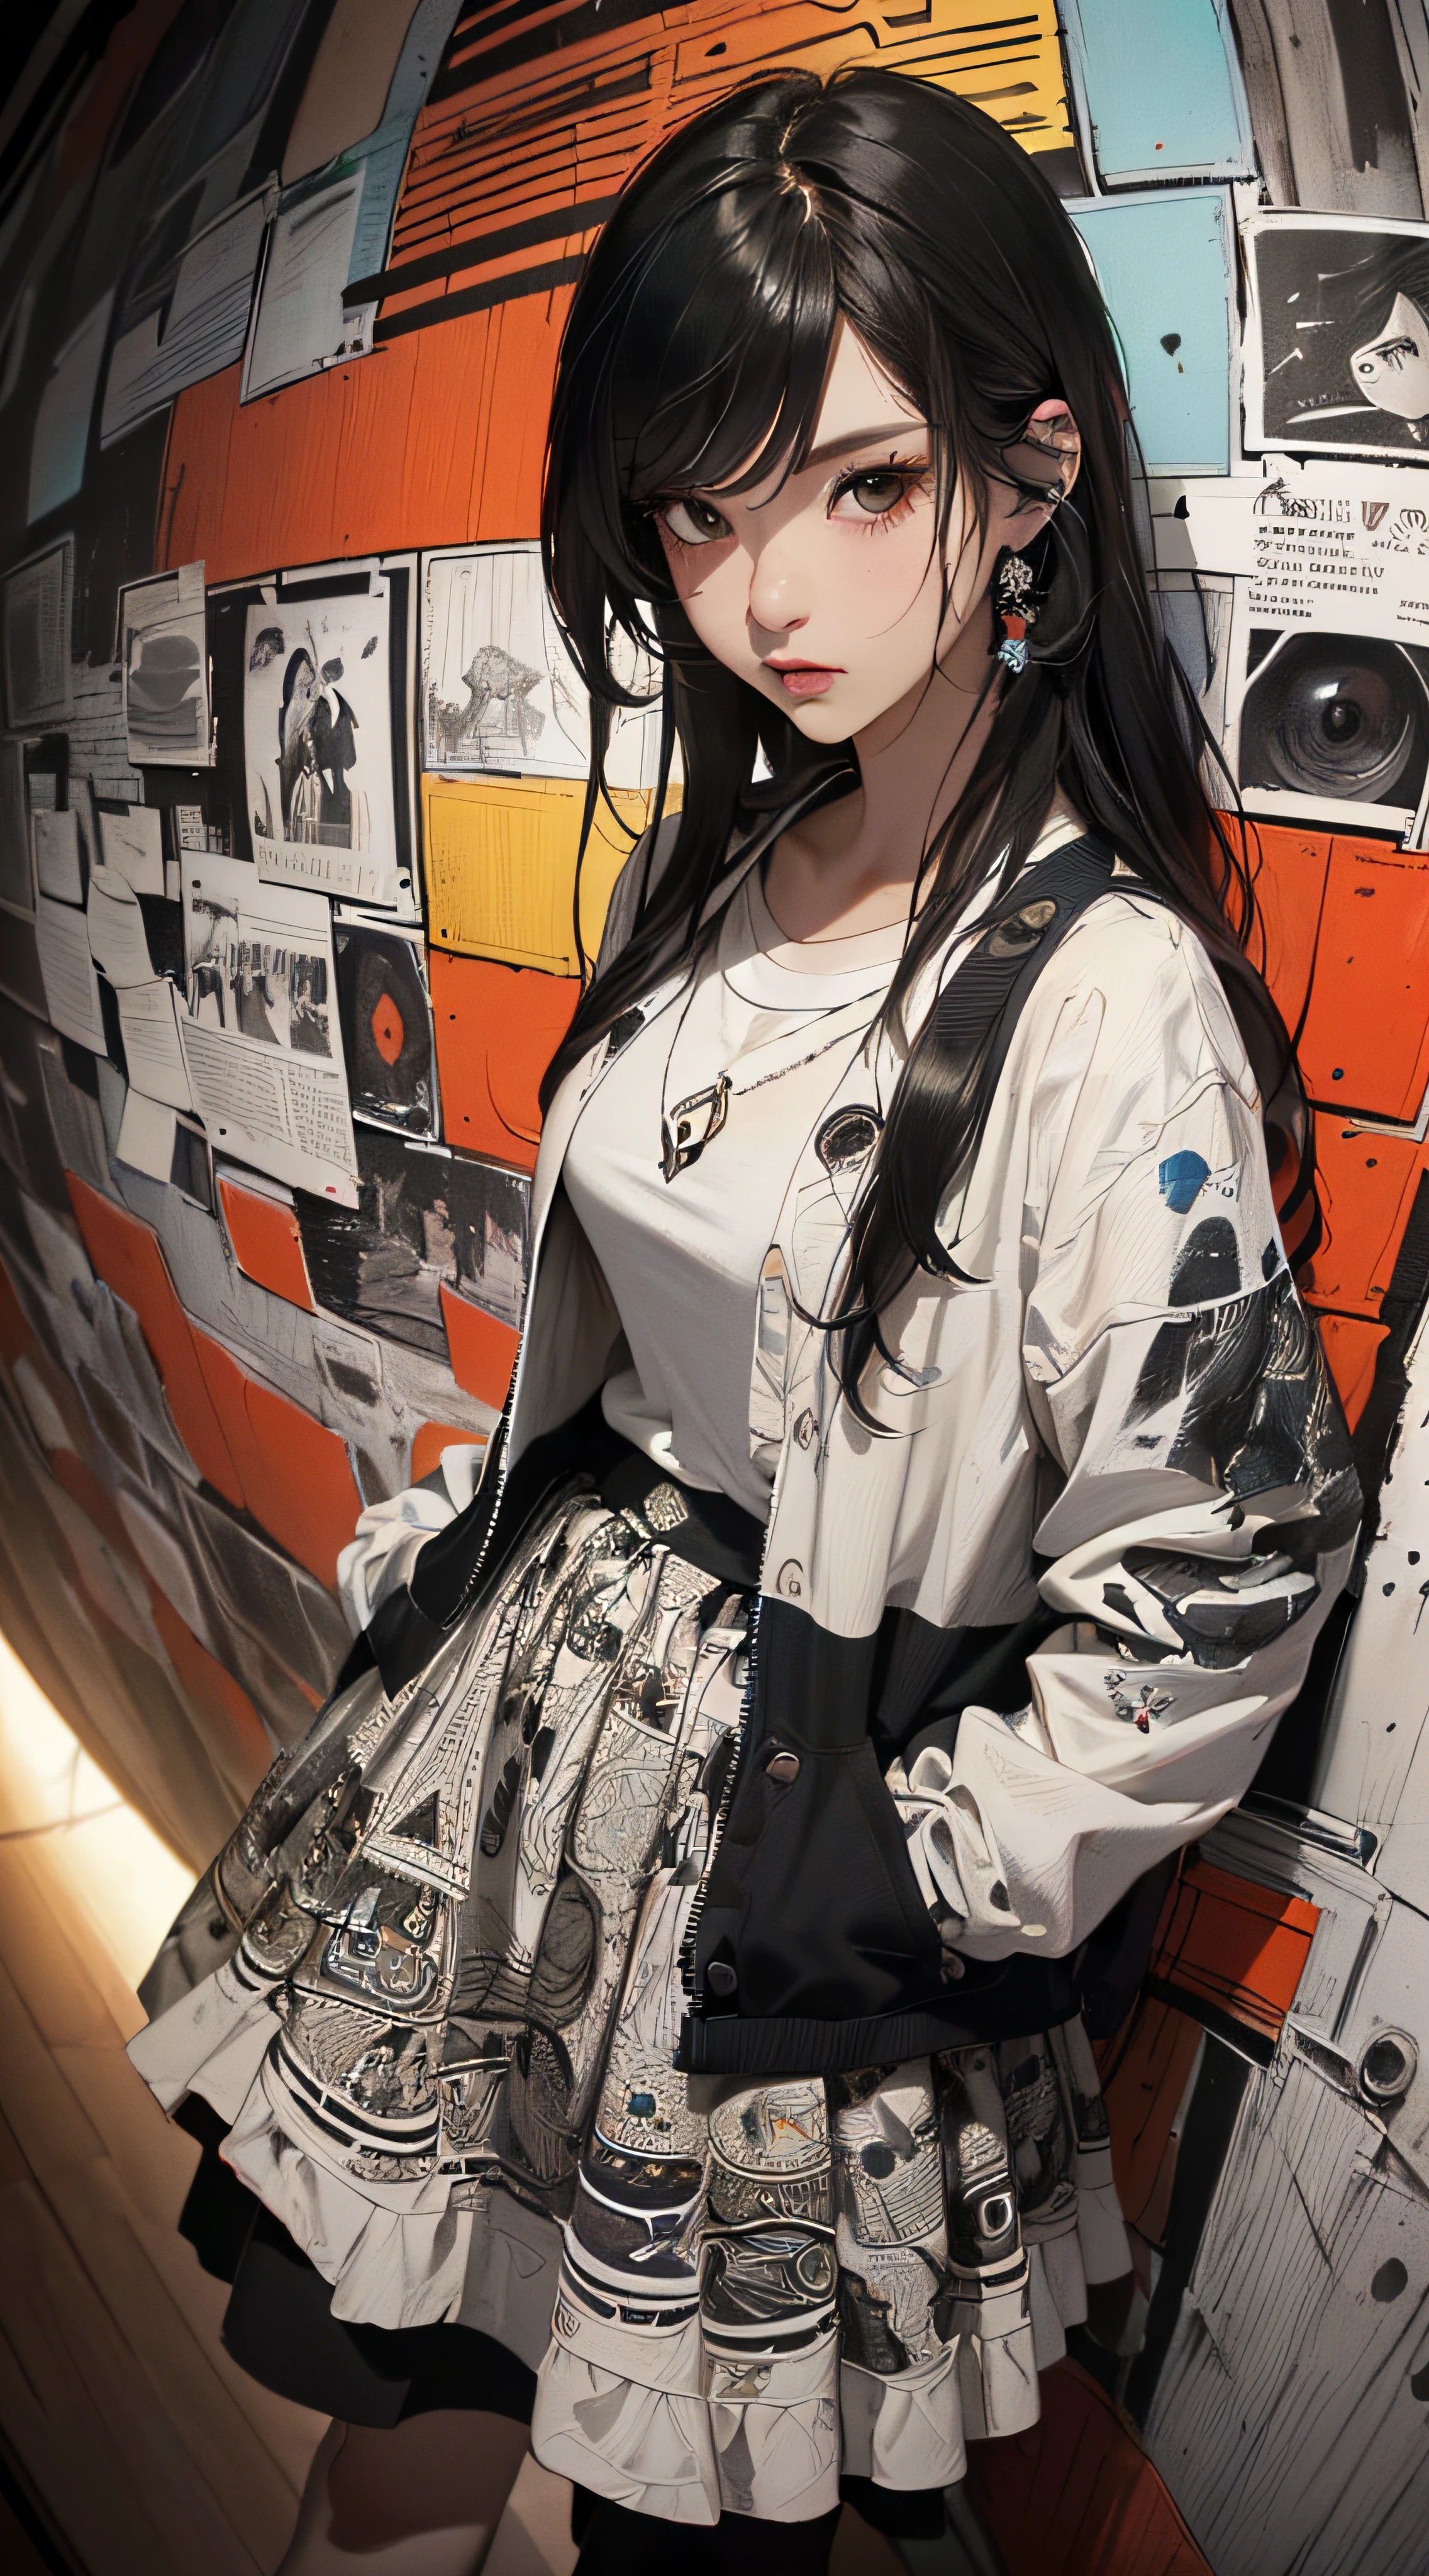 (((8k wallpaper of extremely detailed CG unit:1.2, ​masterpiece, hight resolution:1.2, top-quality:1.2, masutepiece))), ((a very beautiful woman, Hands in pockets:1.8, Grunge Fashion:1.2, Wearing a blouson:1.2, Wearing a long skirt, Wearing shoes)), ((extra detailed face, Highly detailed black eyes, extra detailed body, Top quality real texture skins)), (A dark-haired, length hair, de pele branca, Small:1.2), ((Colorful geometric patterns are painted all over the wall.., Colorful wall)), (high-angle:1.2, Fisheye:1.3), hyper realisitic, digitial painting,